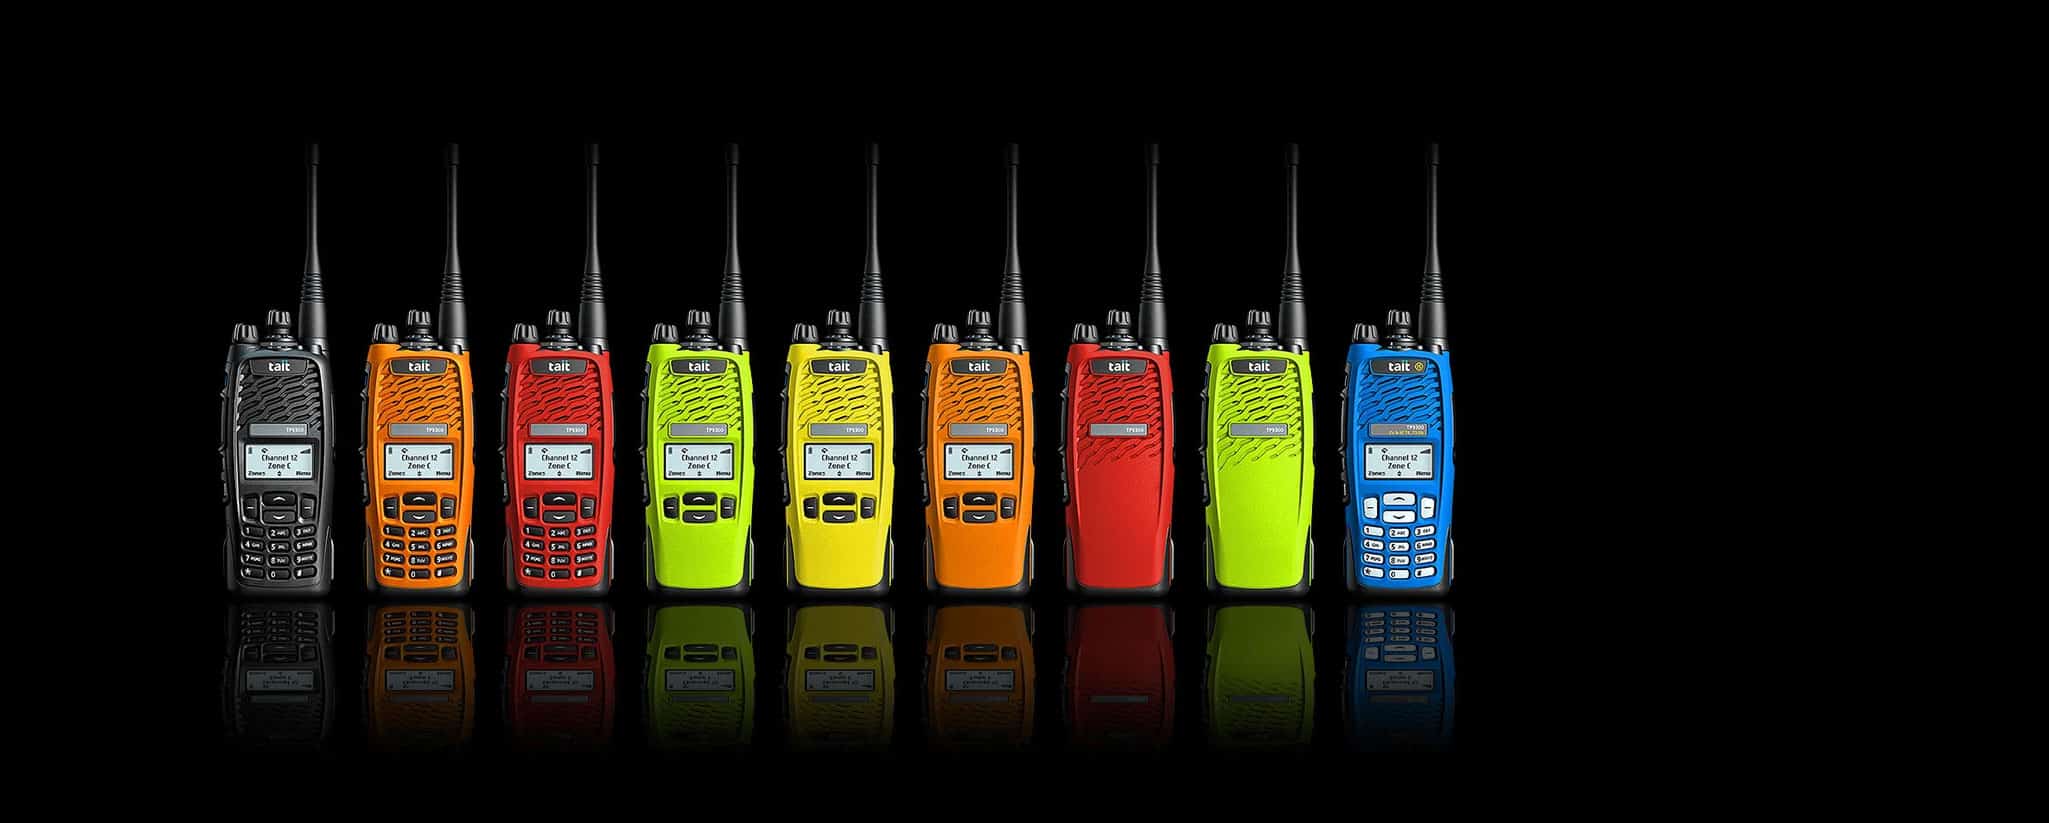 Tait TP9 Series Two Way Radios